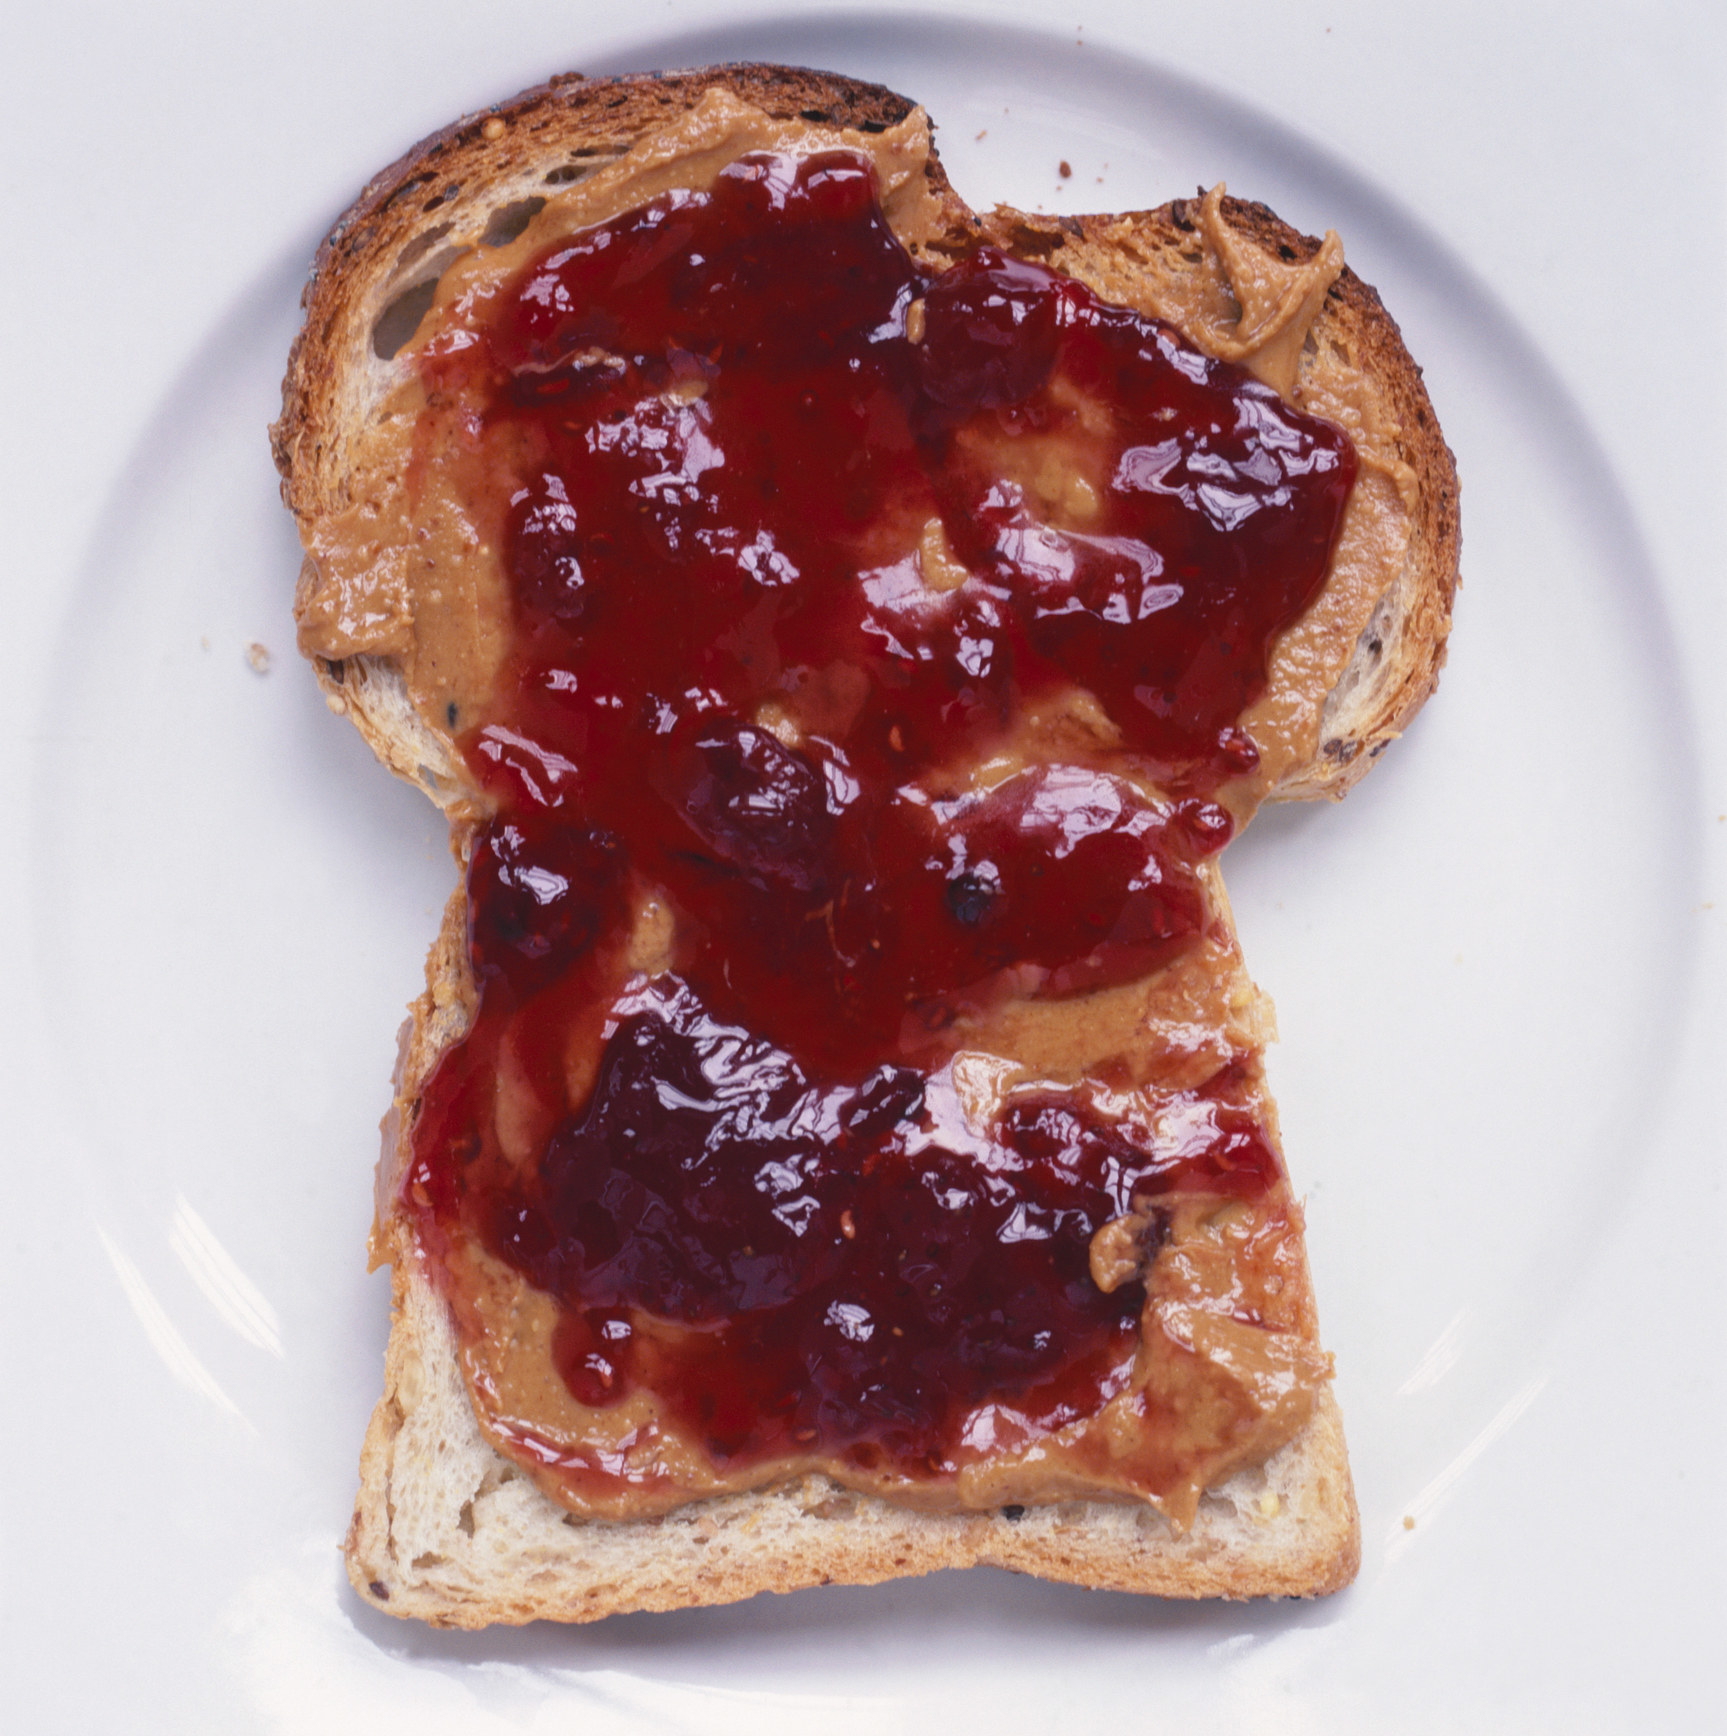 Peanut butter and jelly on toast.